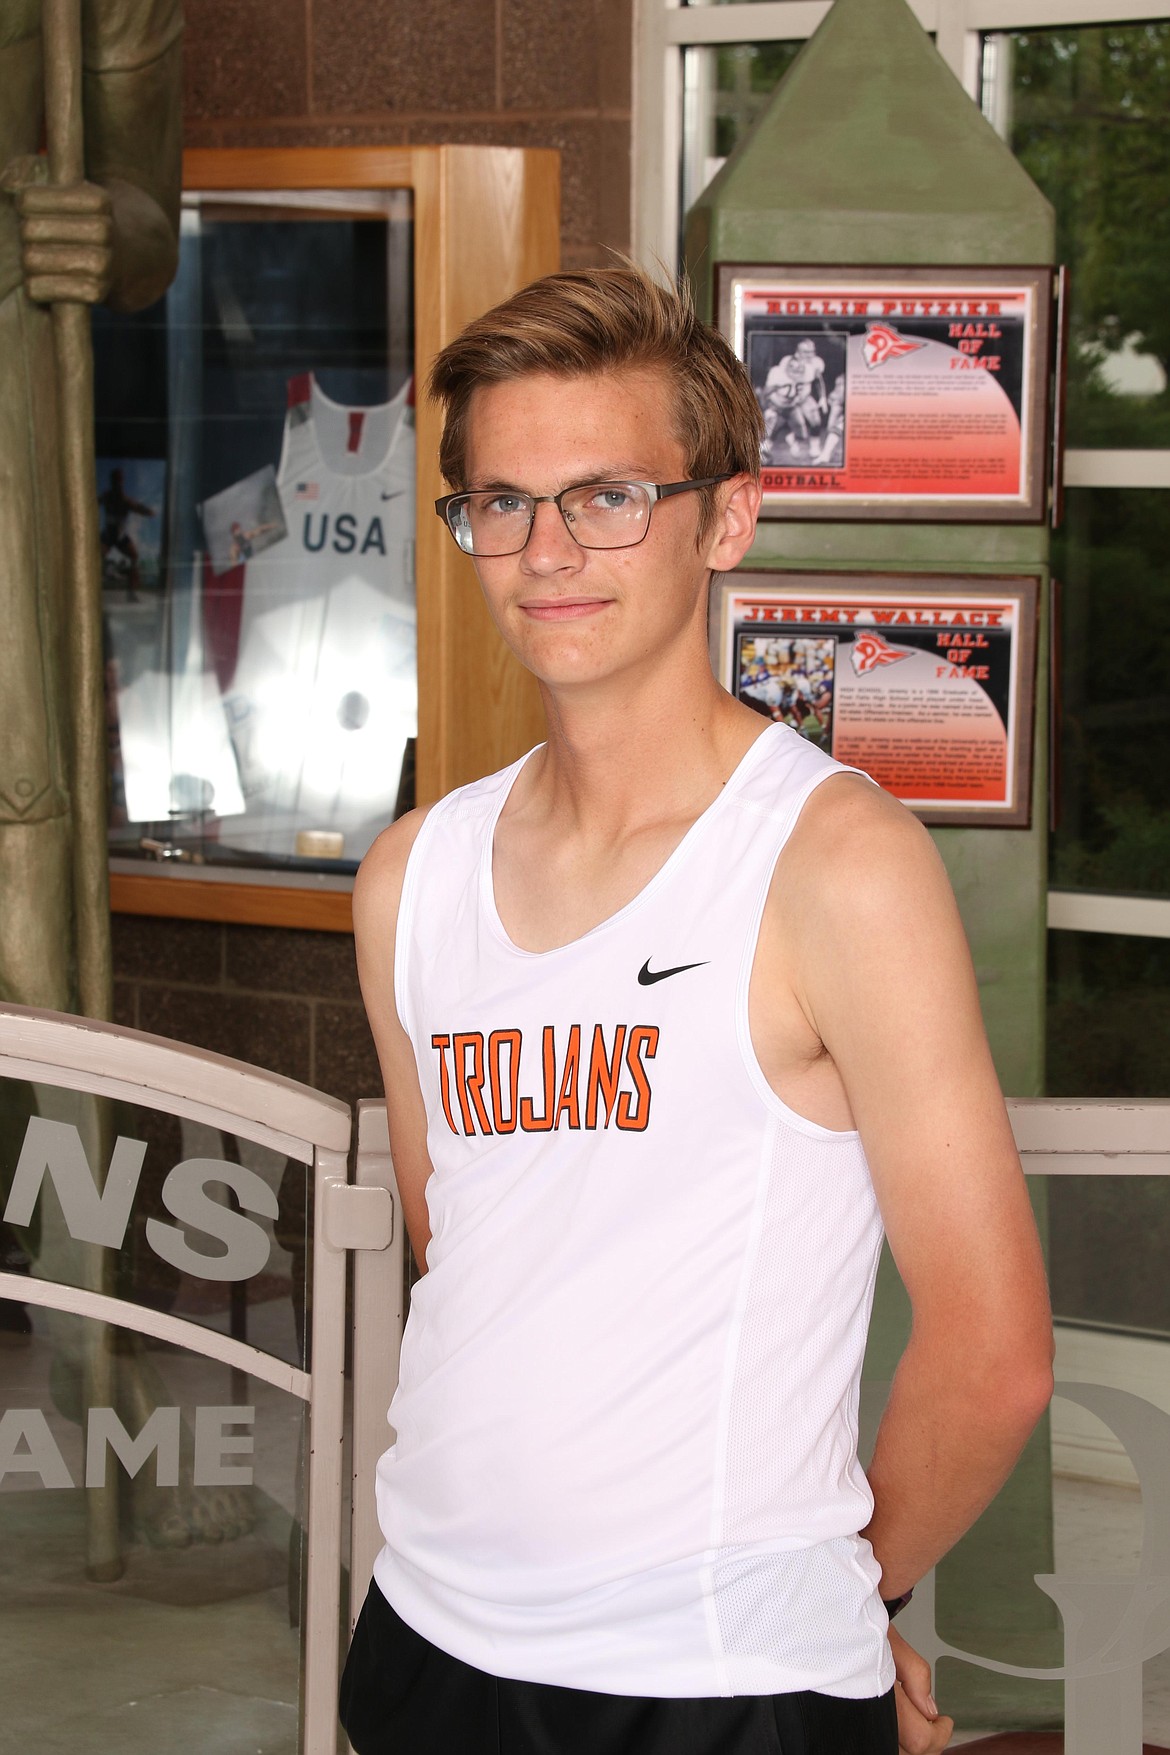 Courtesy photo
Senior cross country runner Gavin Calkins is this week's Post Falls High School Athlete of the Week. Calkins ran a 16:51 at the Battle for the 5009 meet in Cheney on Saturday to become one of five runners at Post Falls to run under 17 minutes in a 5K in the last 20 years. He finished 22 out of 235 runners.